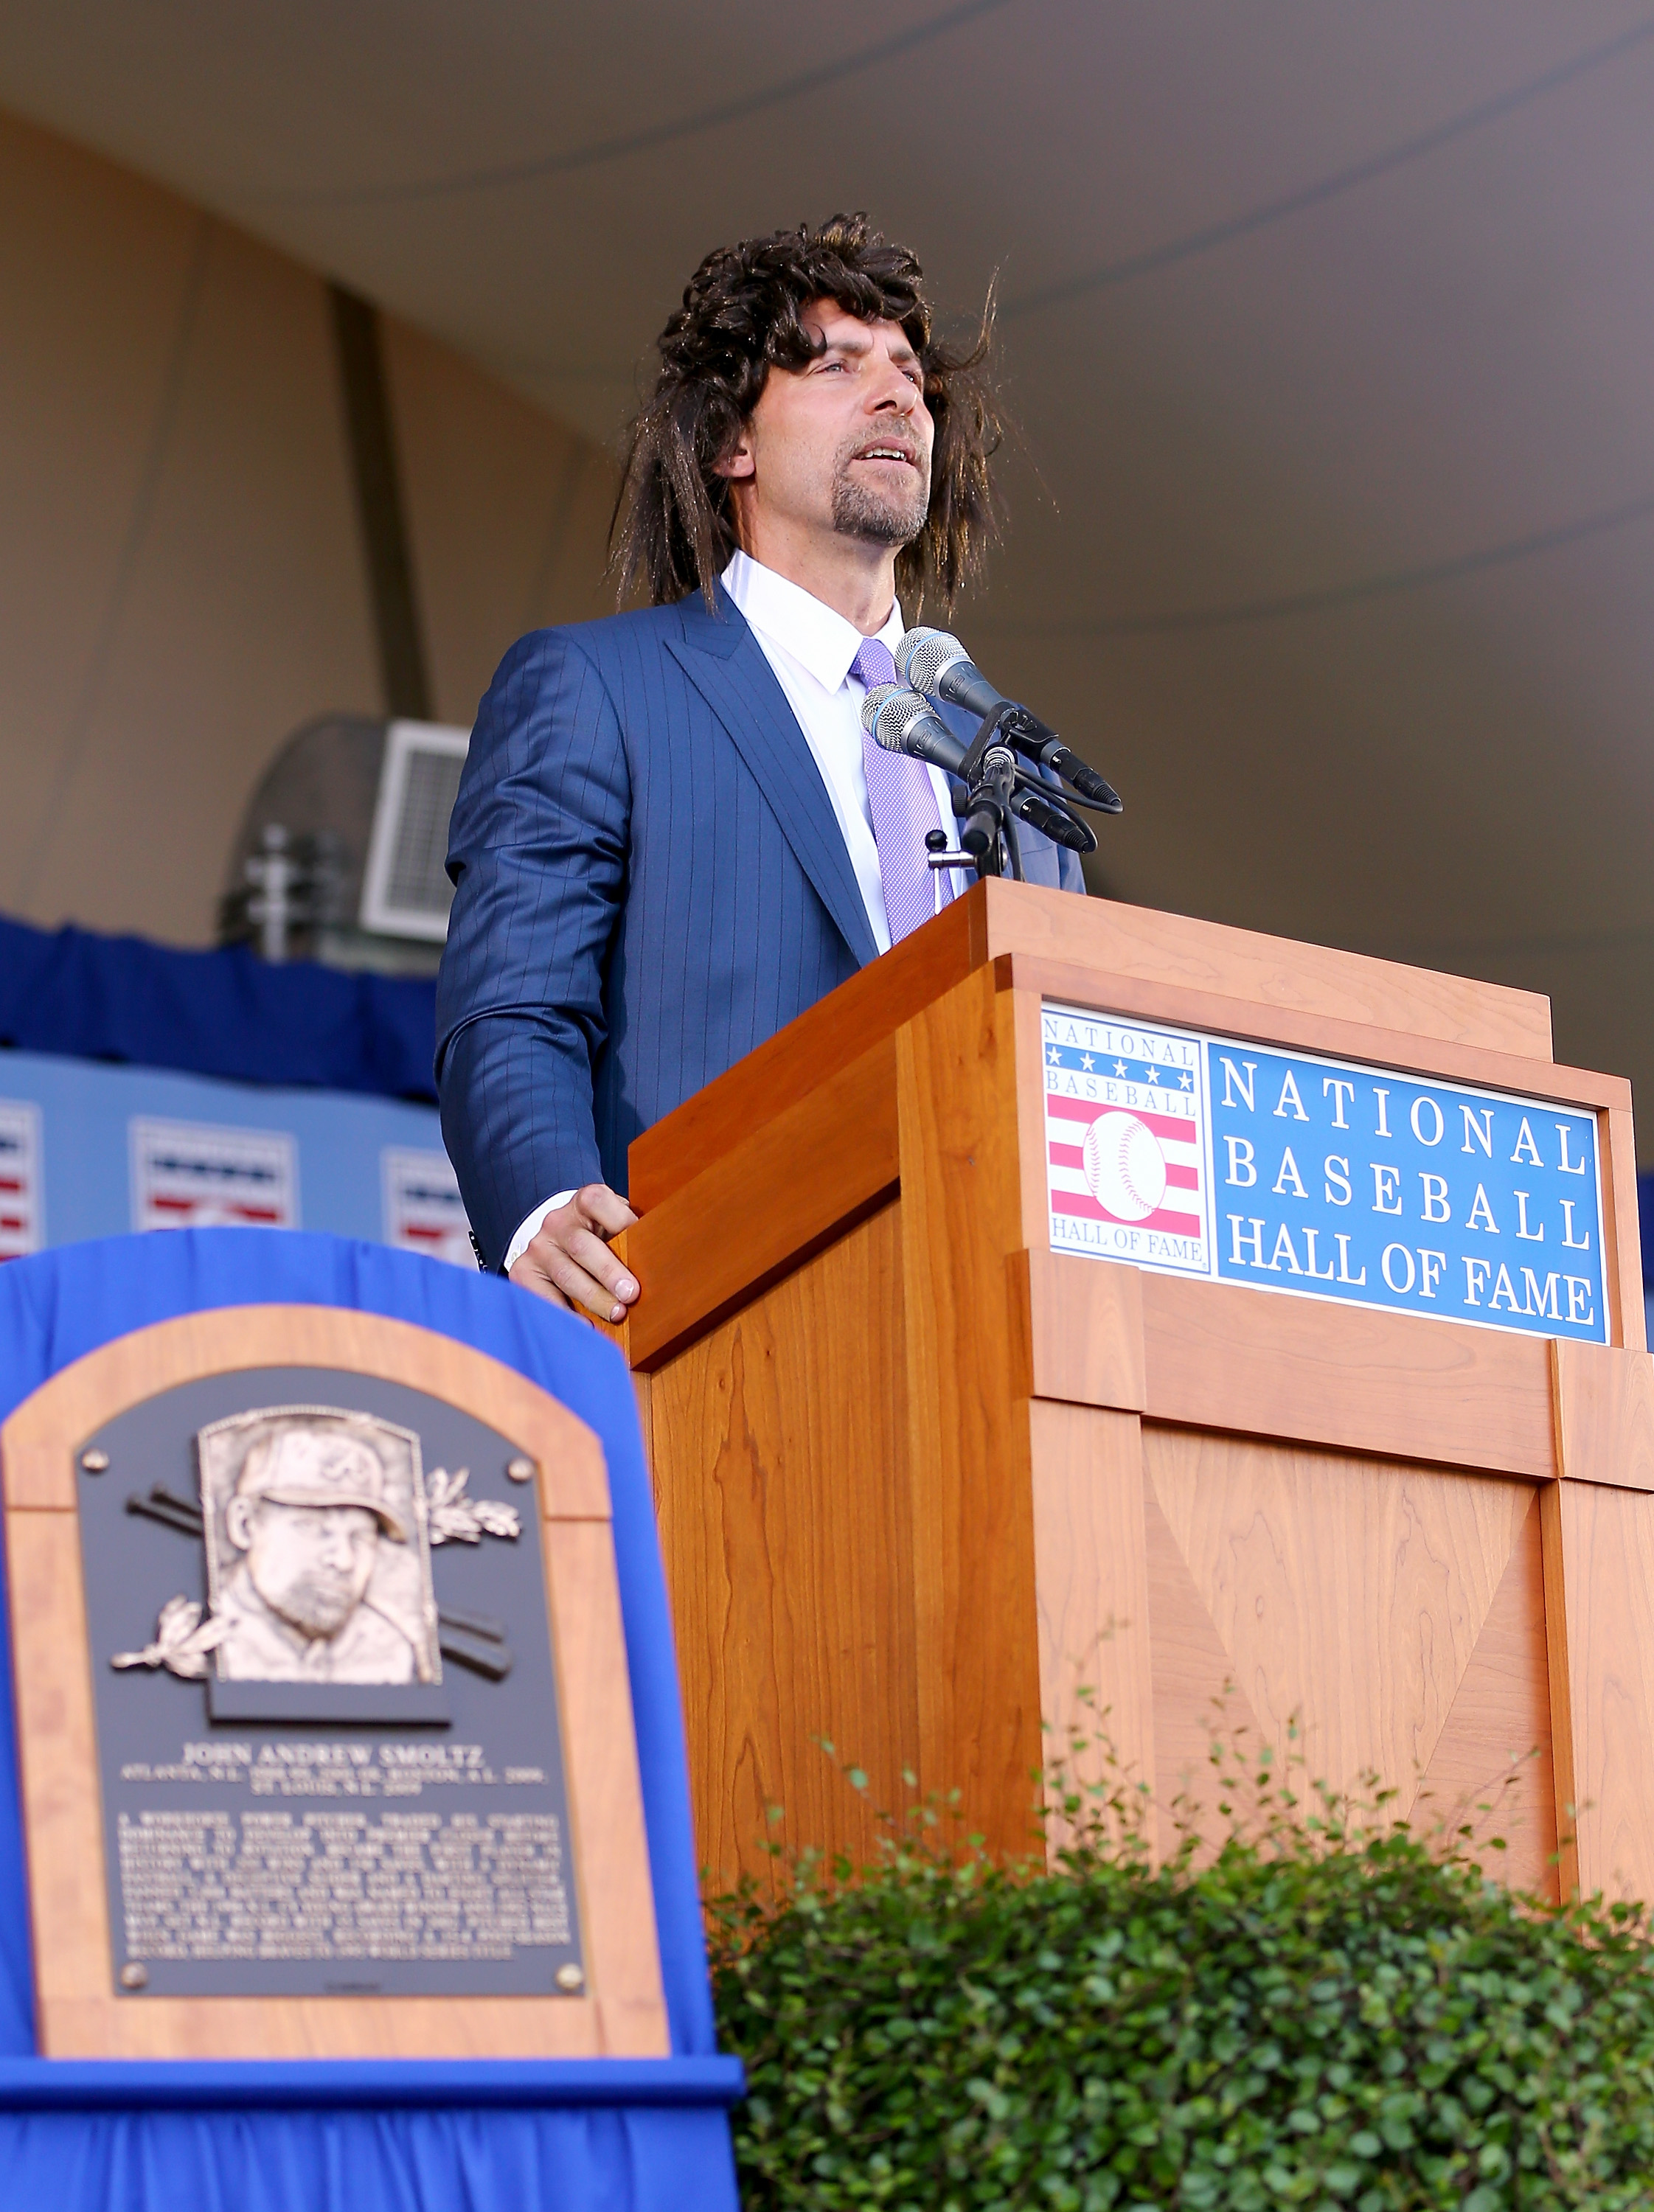 John Smoltz Wears a Wig During Baseball Hall of Fame Induction [VIDEO]